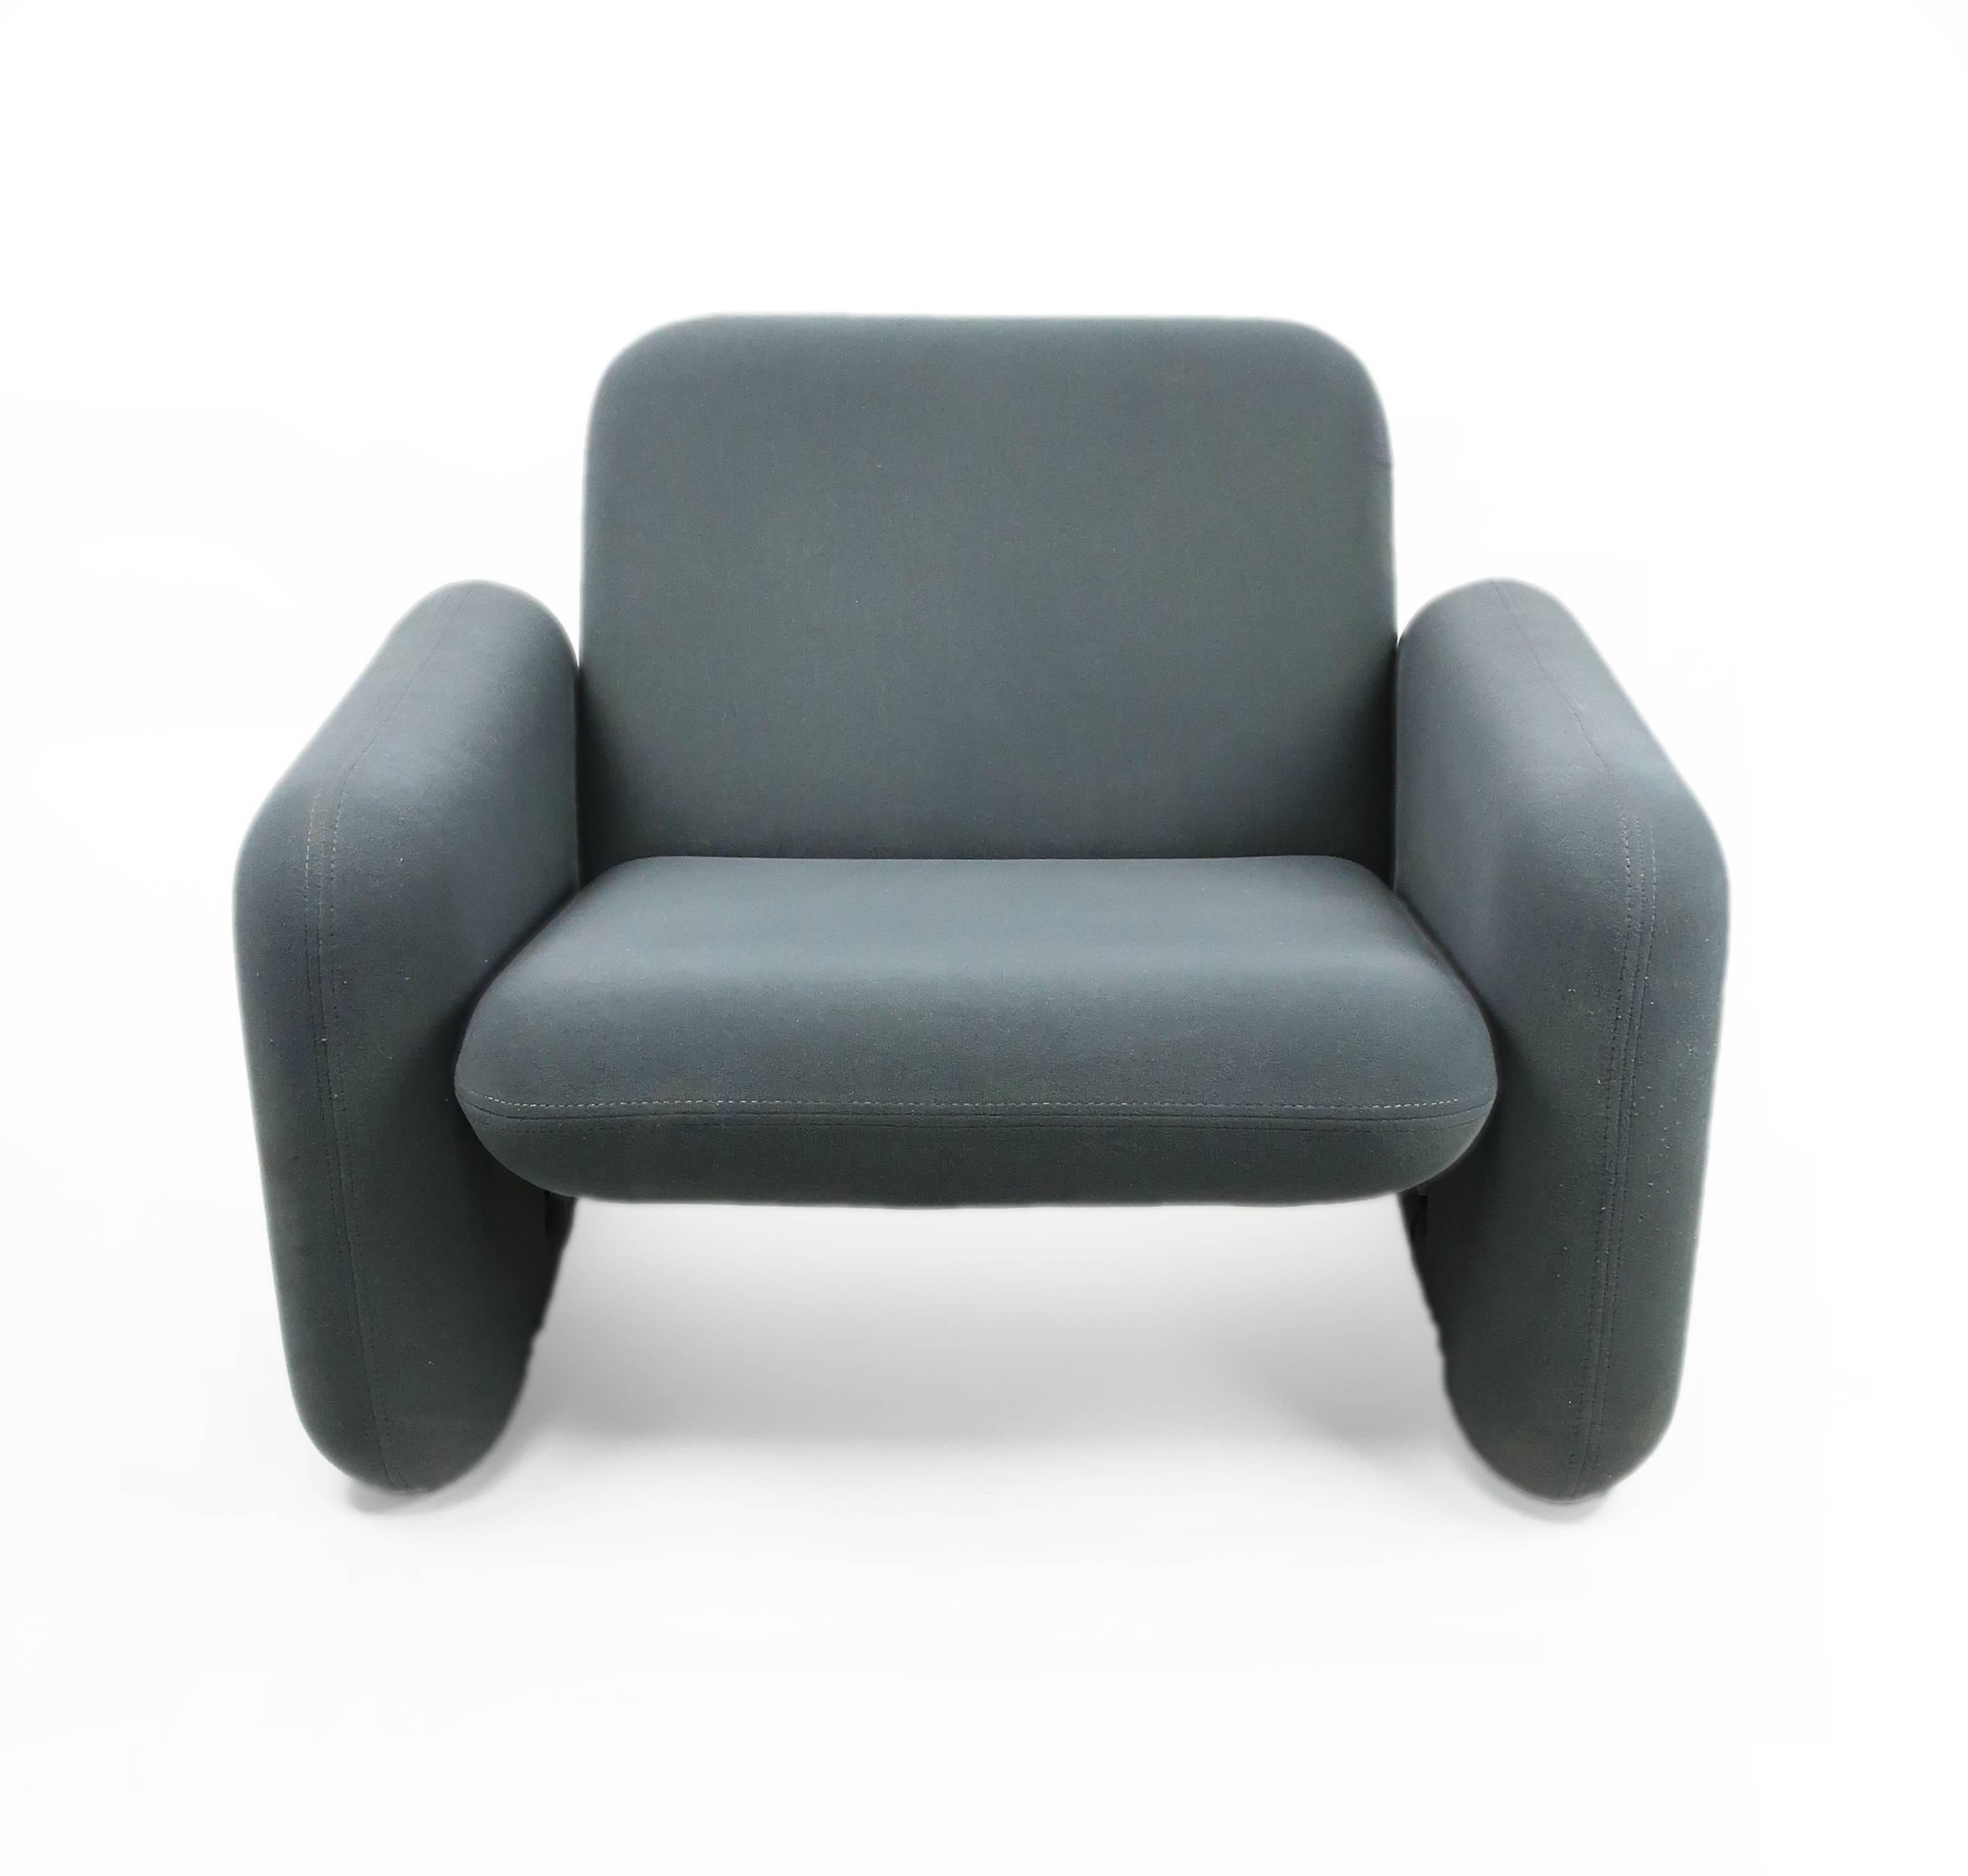 This Mid-Century Modern lounge chair designed by Ray Wilkes for Herman Miller gets its name from its cushions that look like large pieces of Chiclet gum. Produced in 1976, the Chiclet chair clearly is from the same era as Pierre Paulin’s greatest